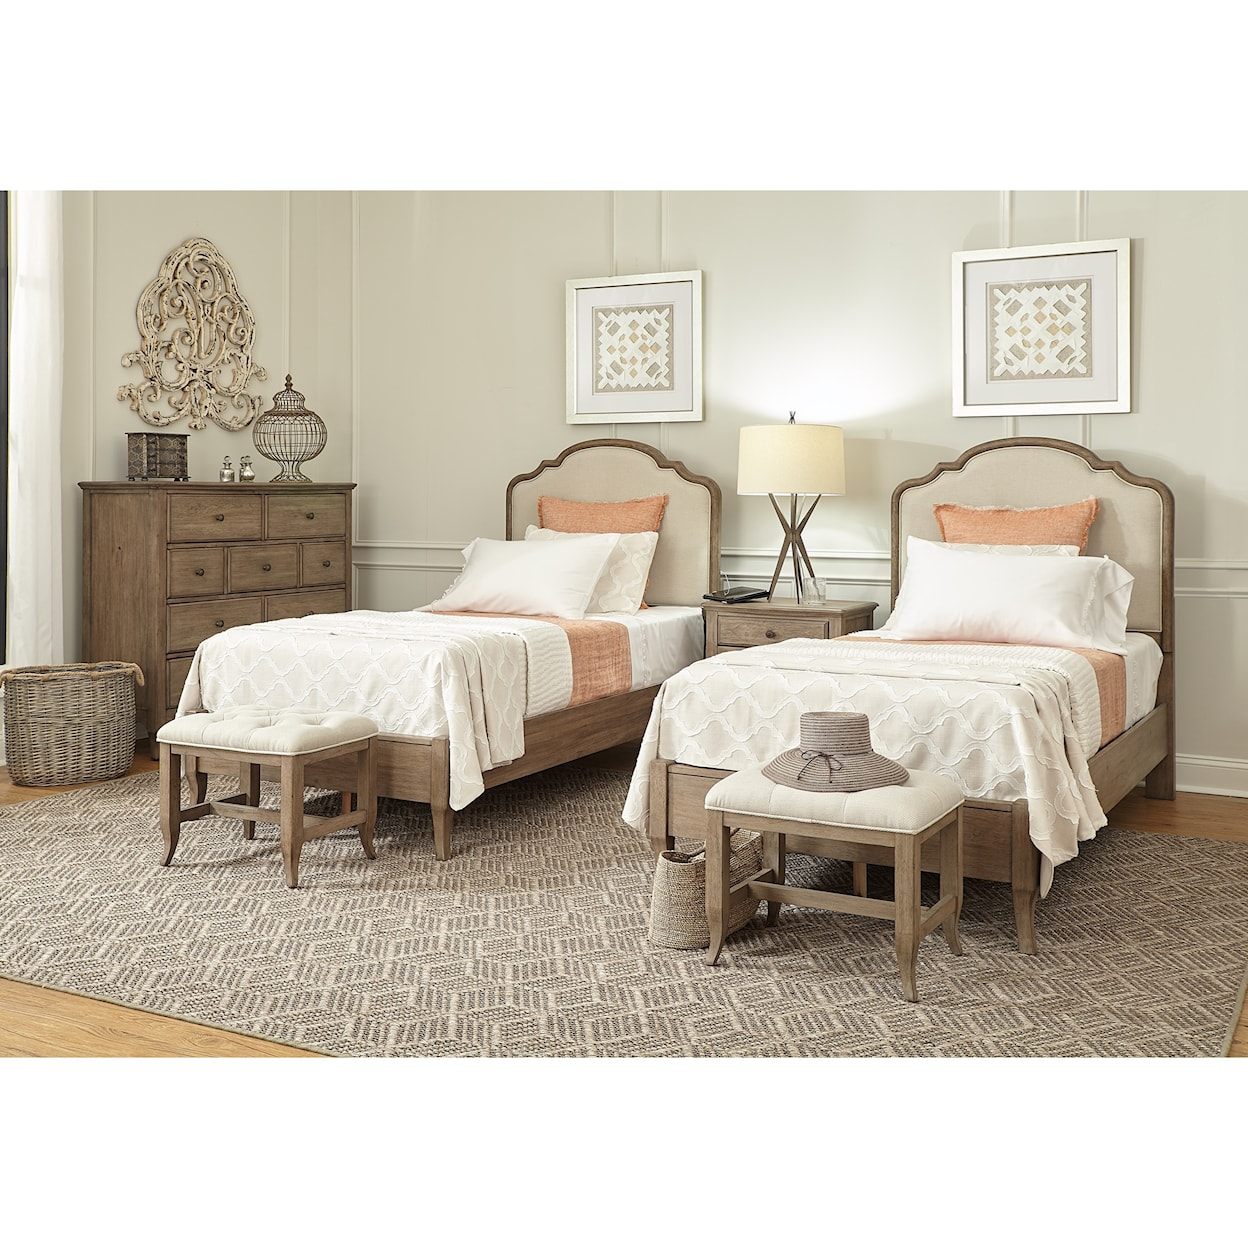 Aspenhome Provence Twin Bedroom Group